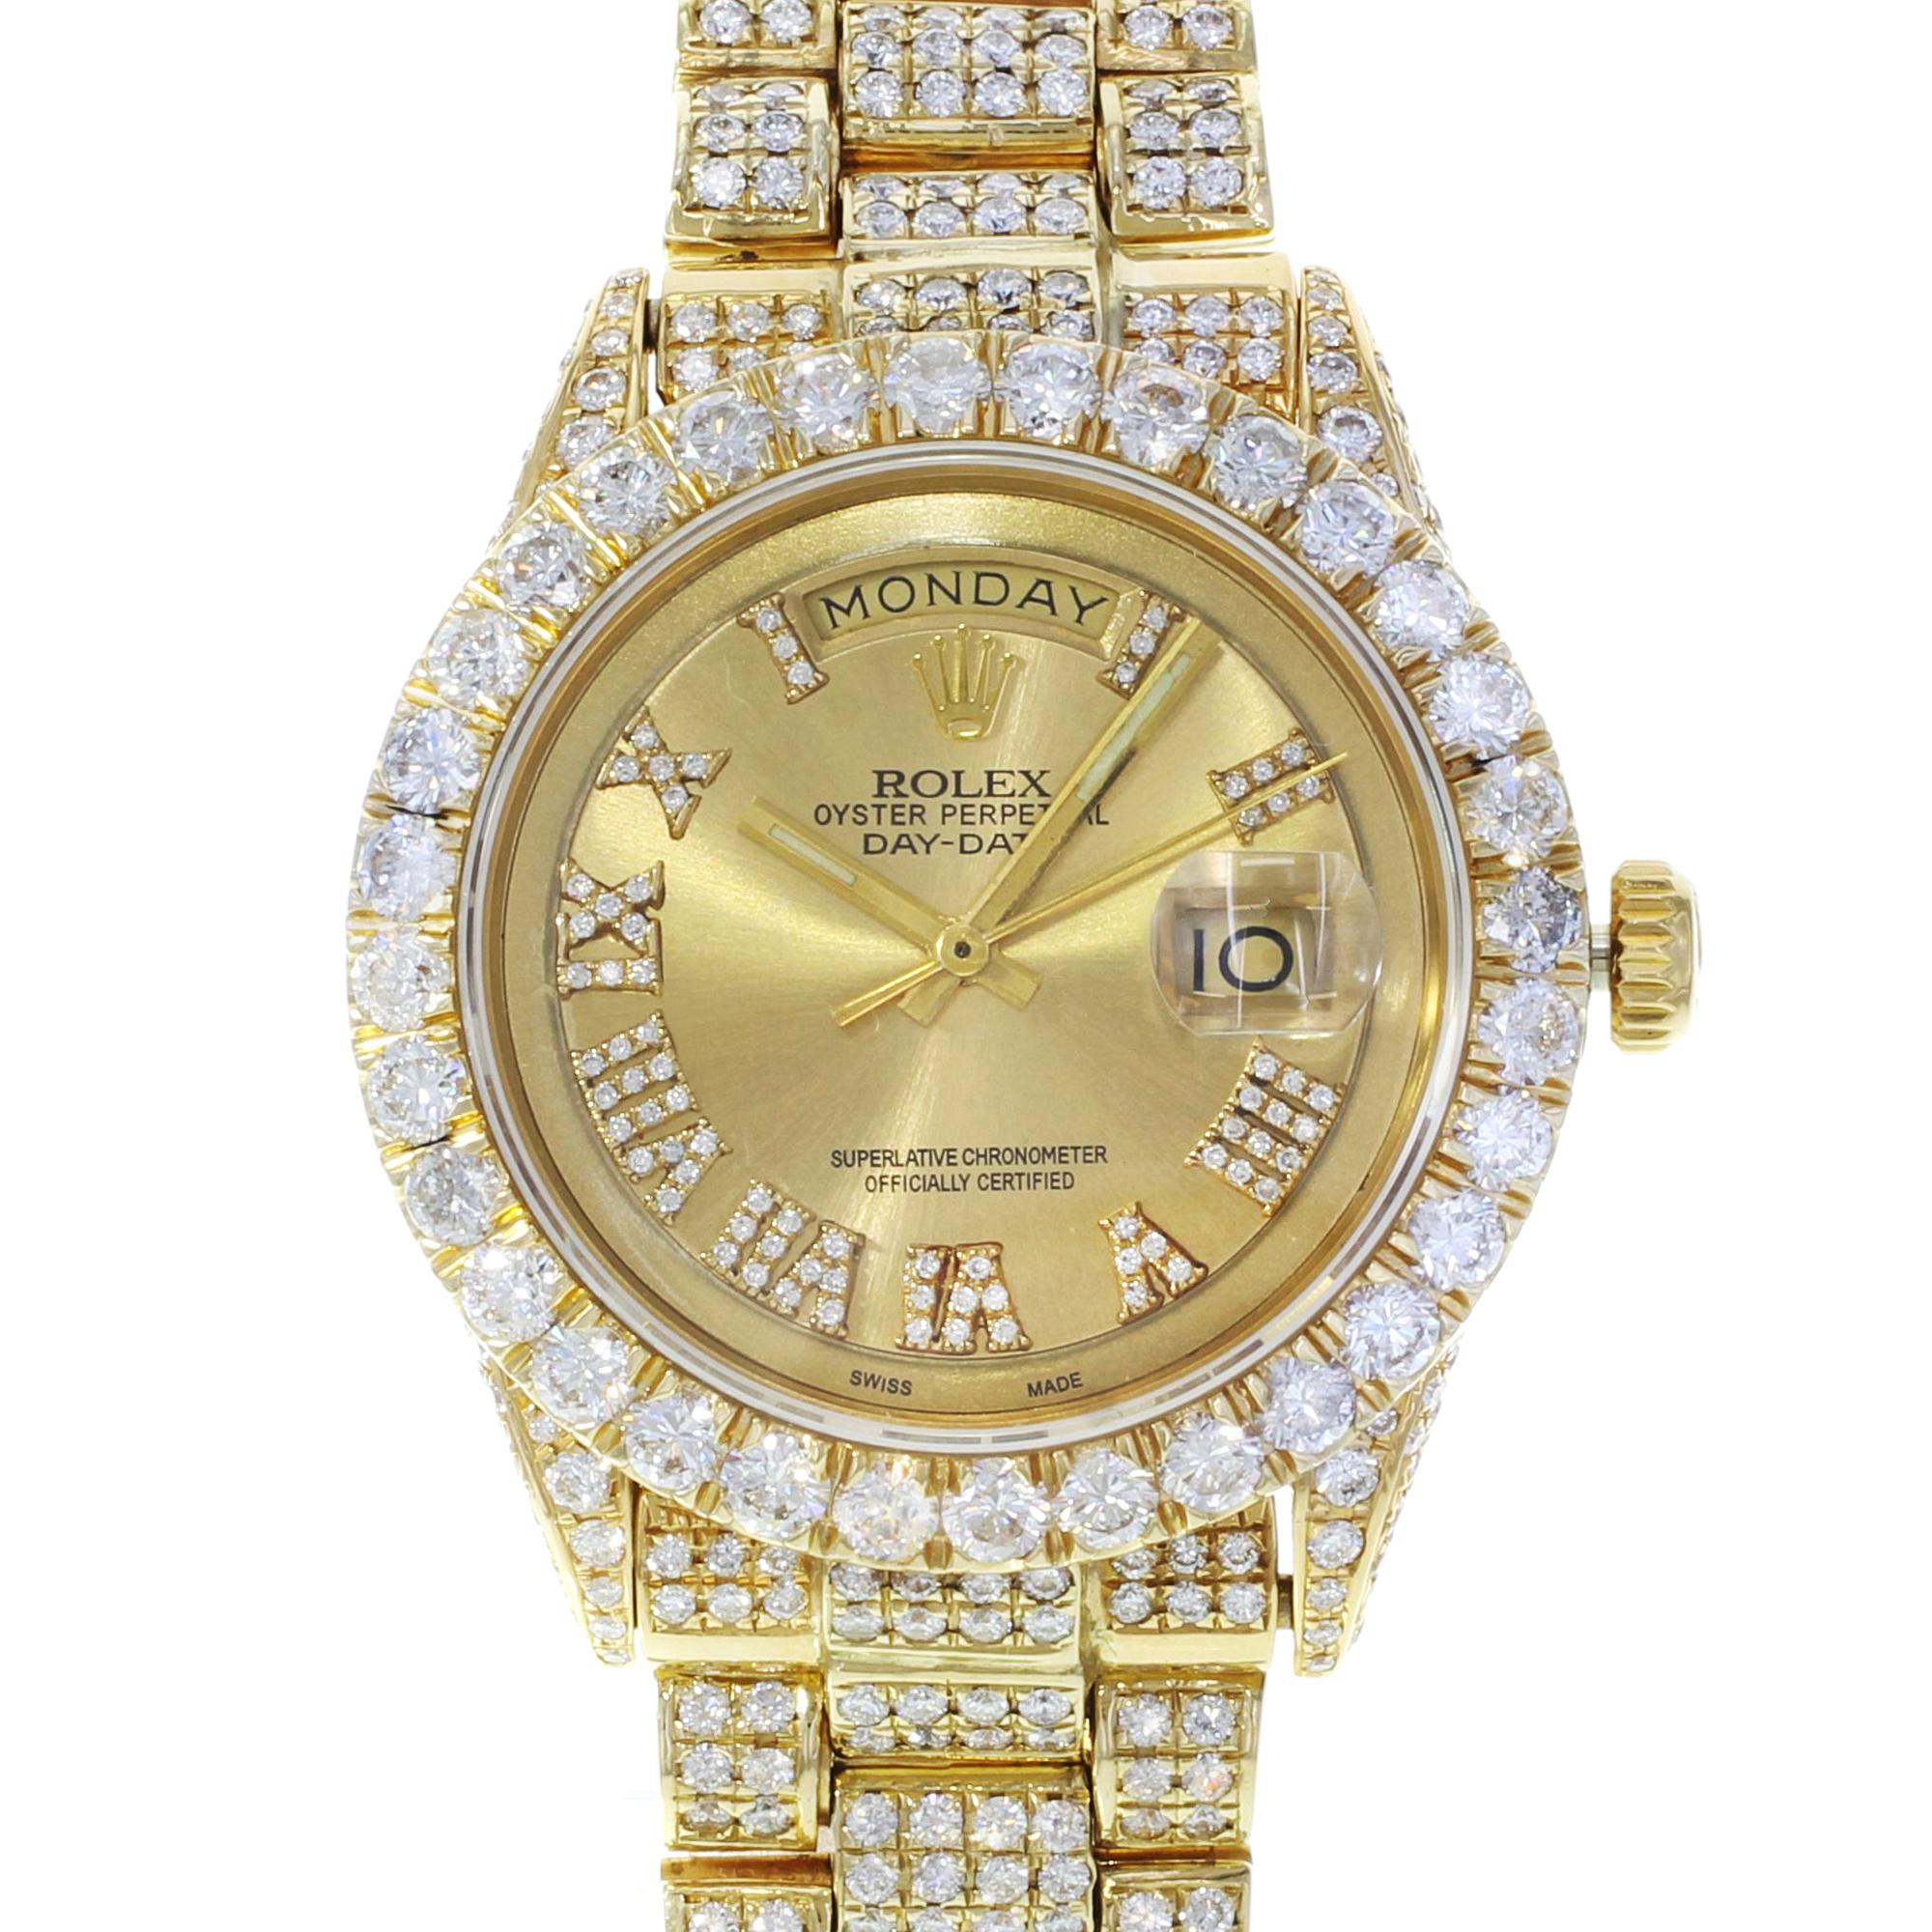 Rolex Day Date 1803 Yellow Gold Champagne Dial Custom Diamond 16ct Mens Watch

This pre-owned Rolex Day Date 1803  is a beautiful men's timepiece that is powered by an automatic movement which is cased in a yellow gold case. It has a round shape